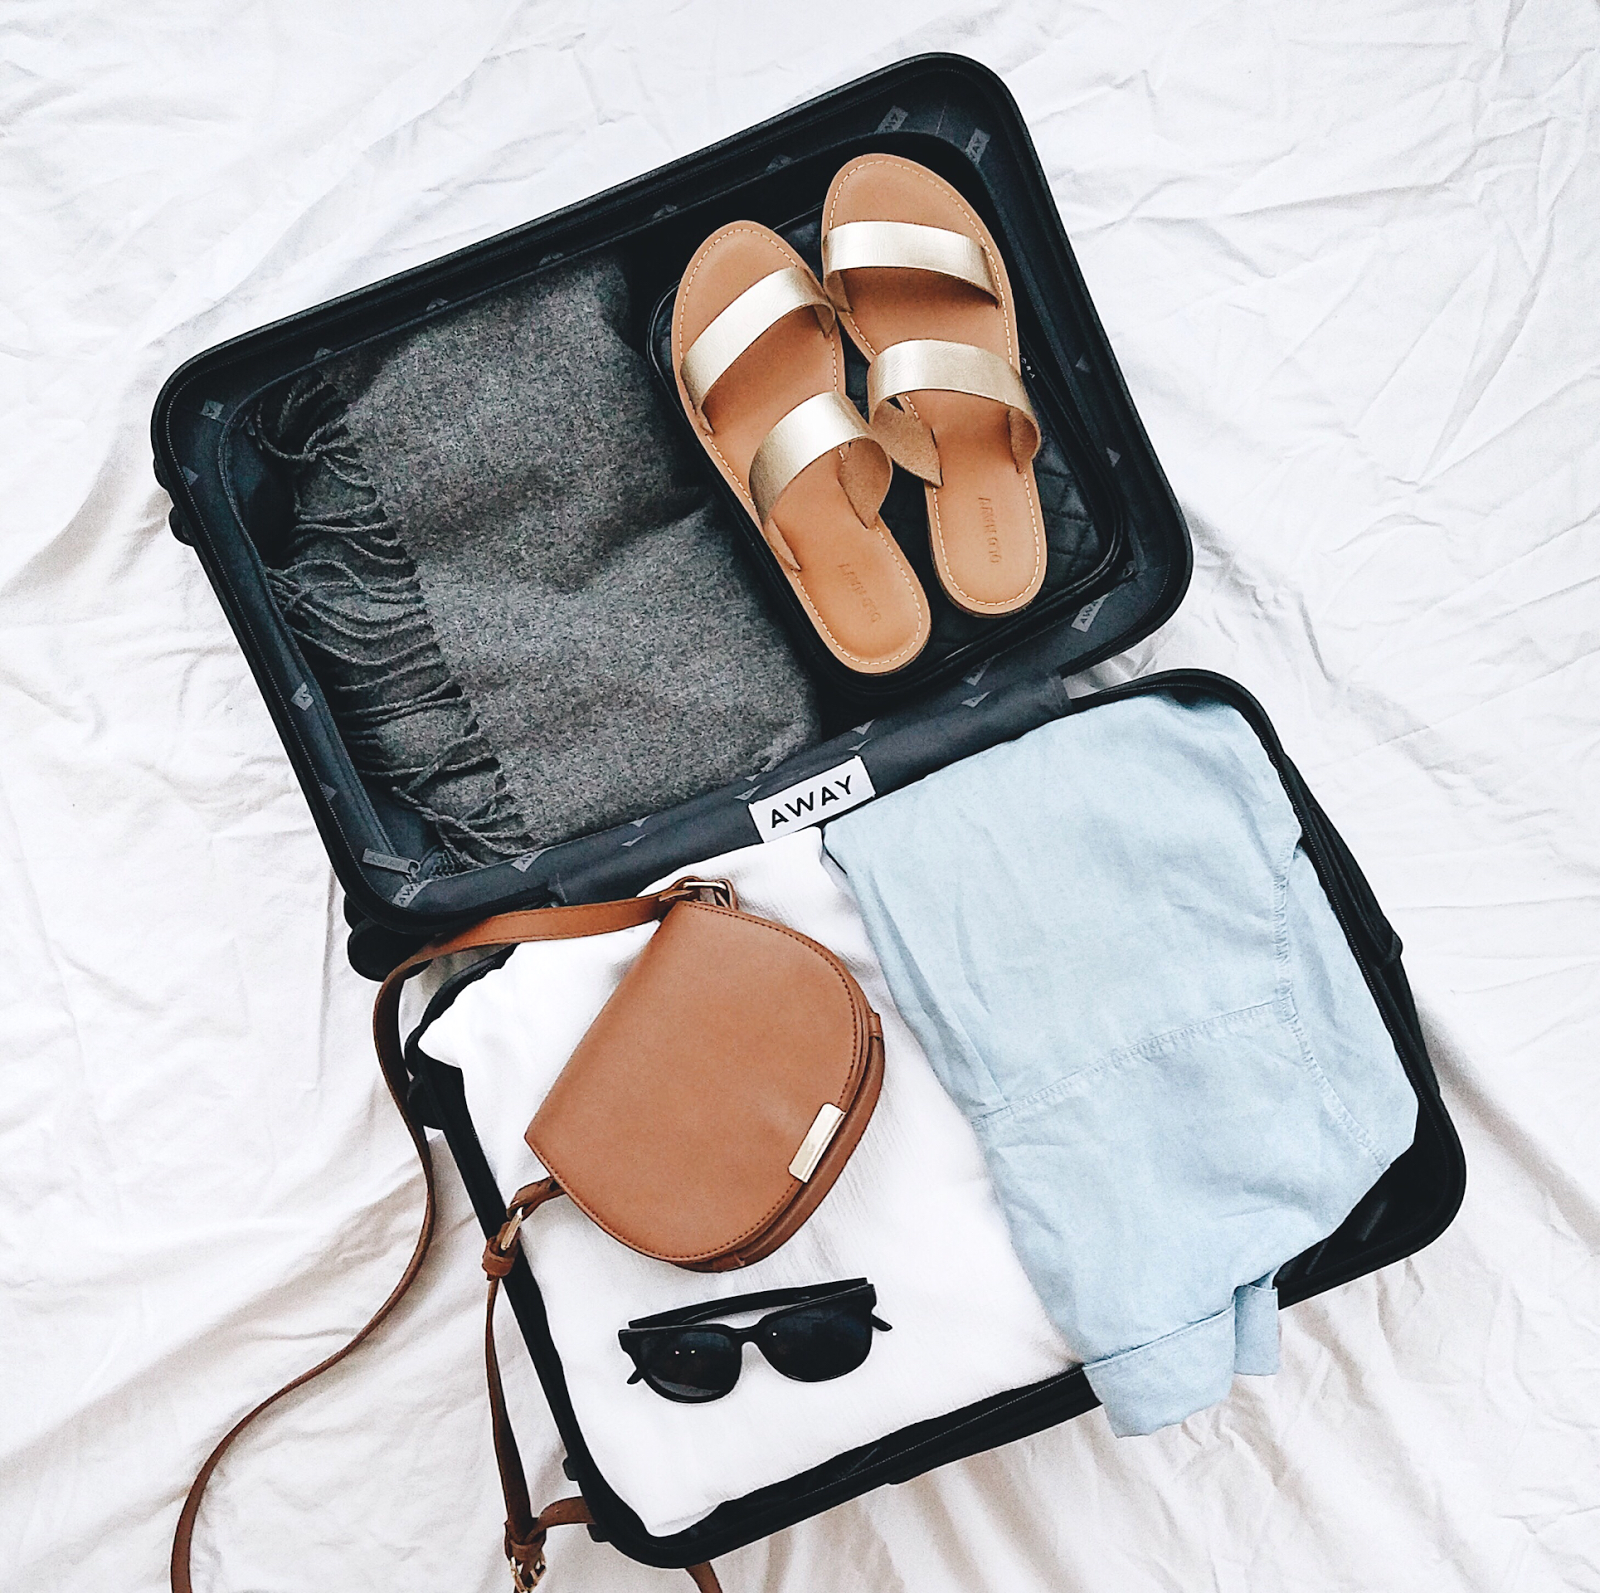 Weekend travel essentials tucked cleanly into a modern Away rolling suitcase.